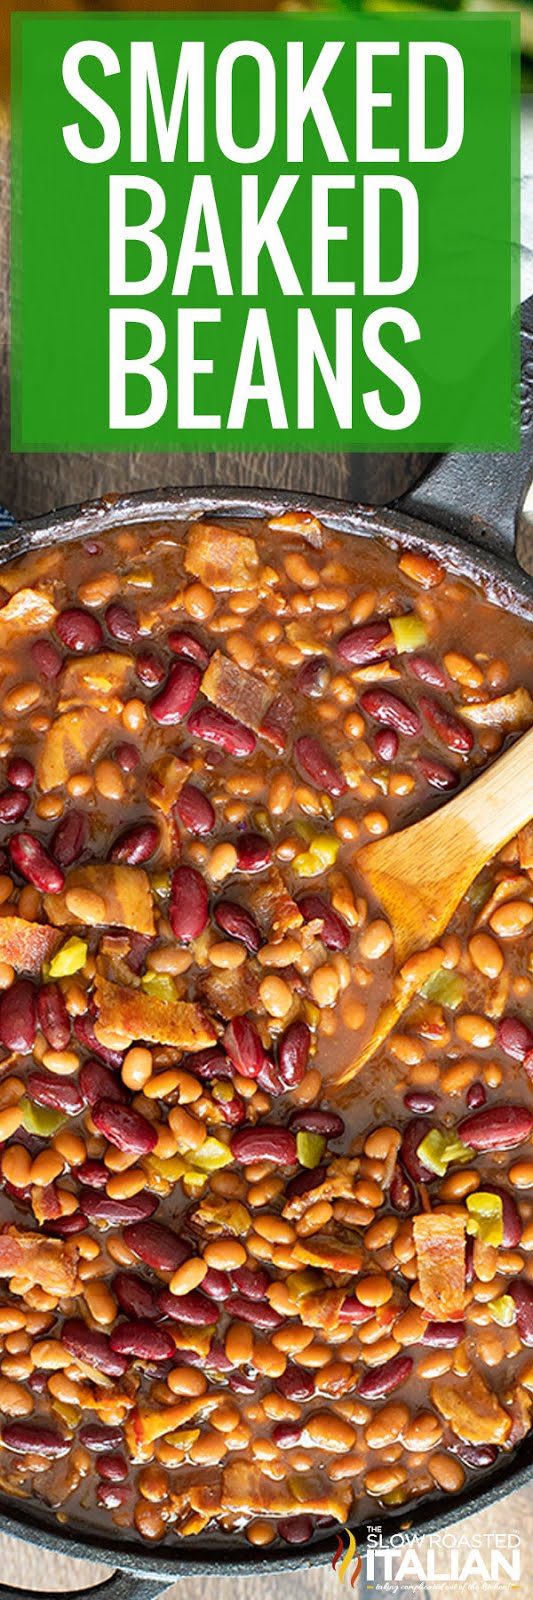 smoked baked beans